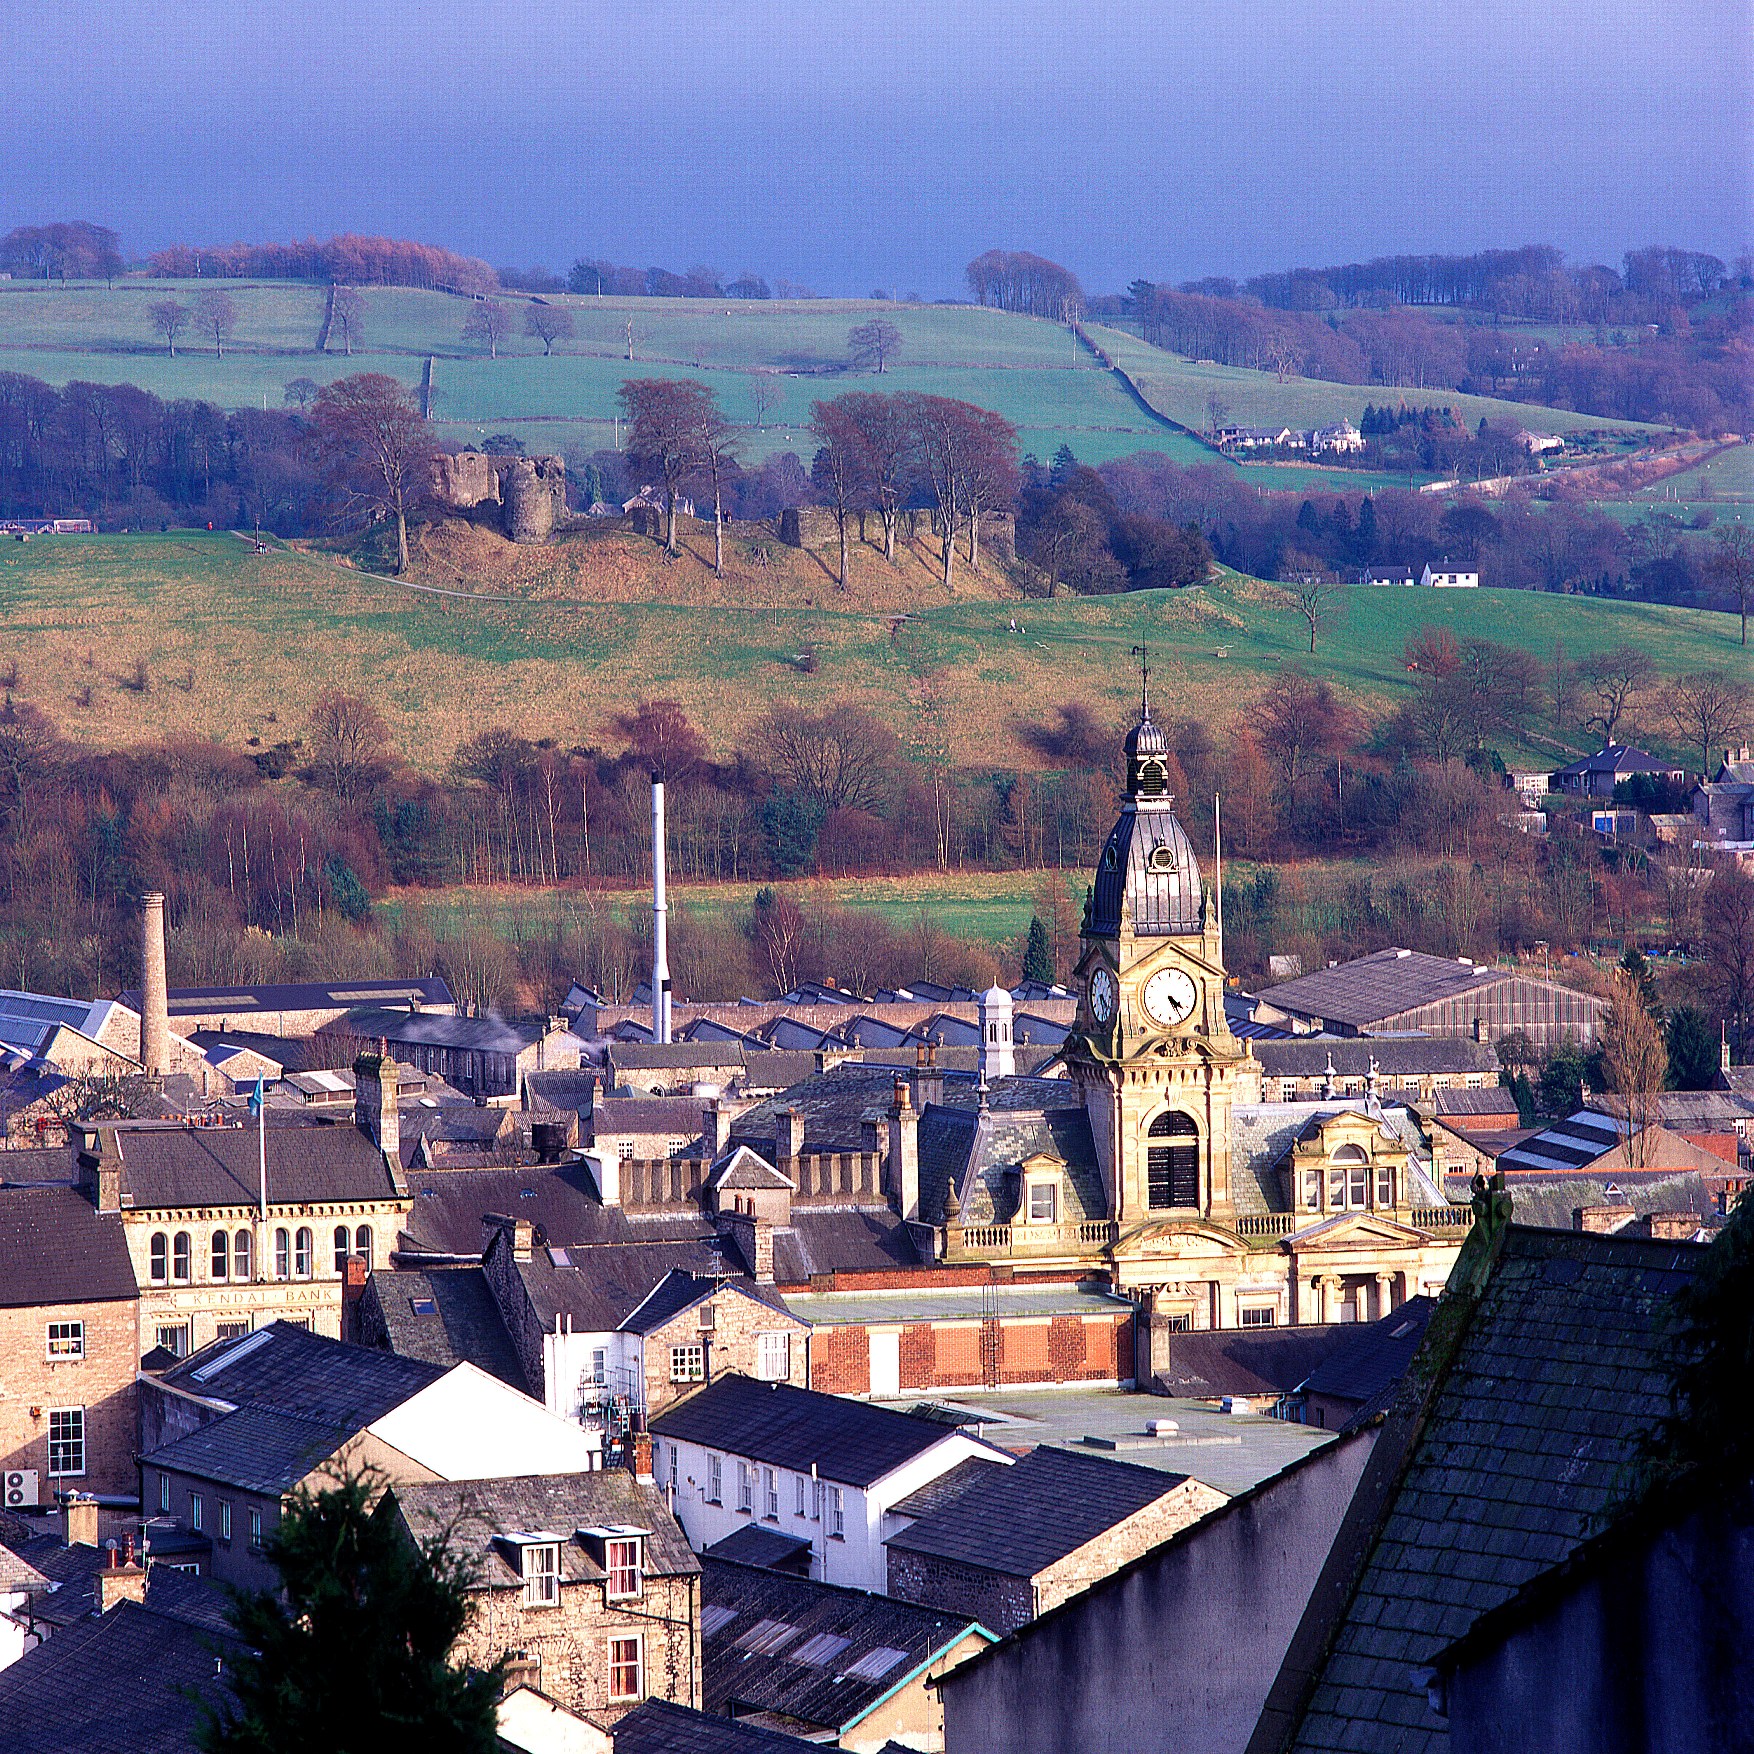 A view across the roof tops of kendal with the castle in the background © www.golakes.co.uk